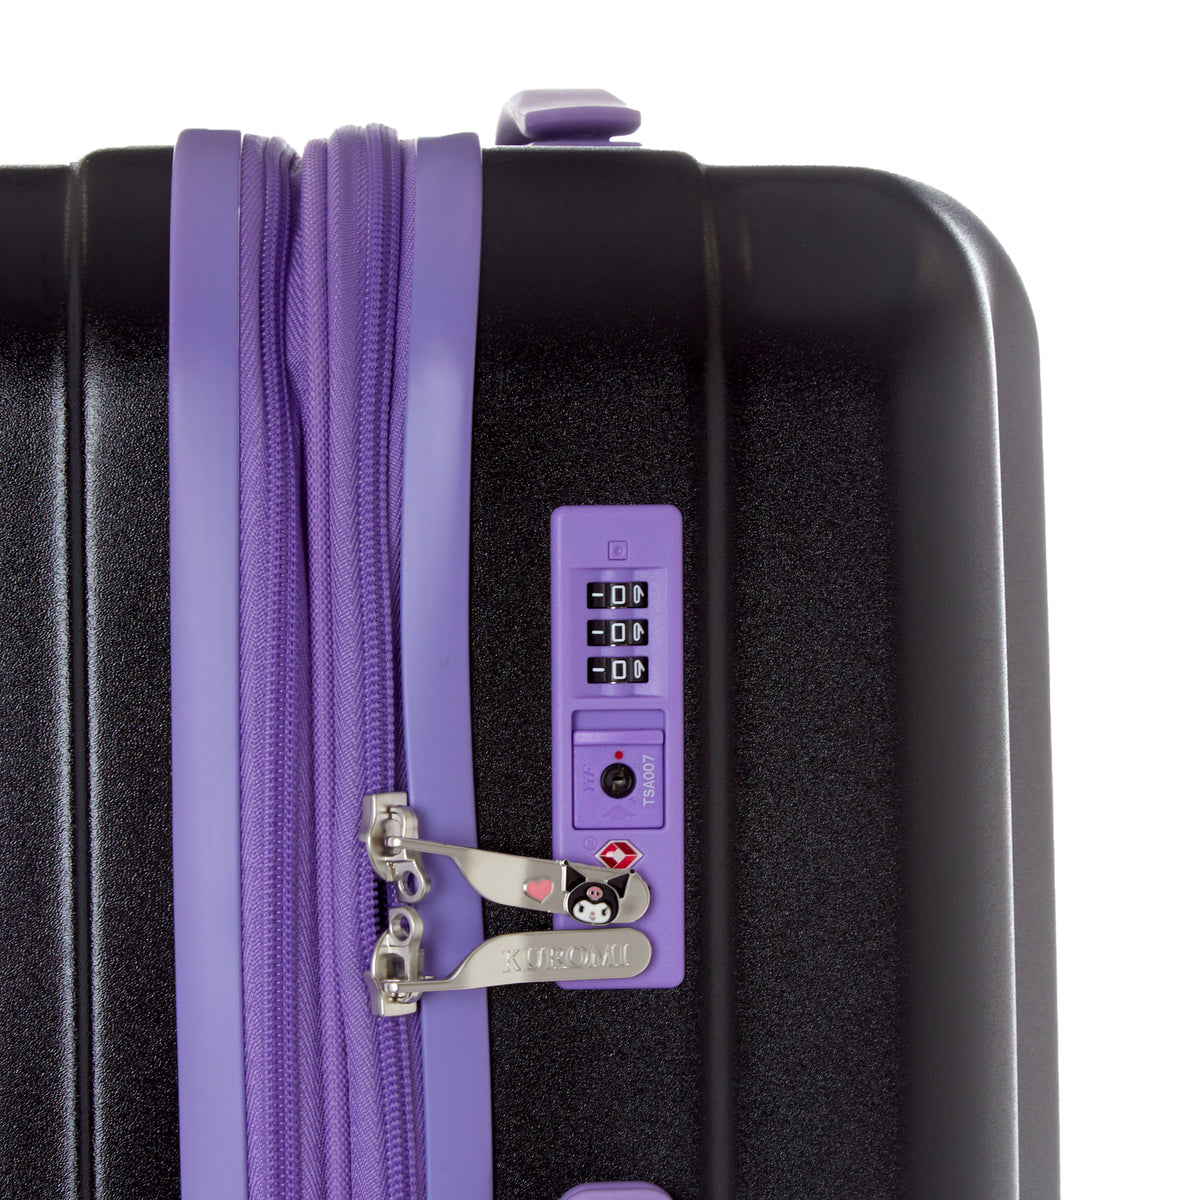 Away Travel relaunches limited-edition lavender luggage